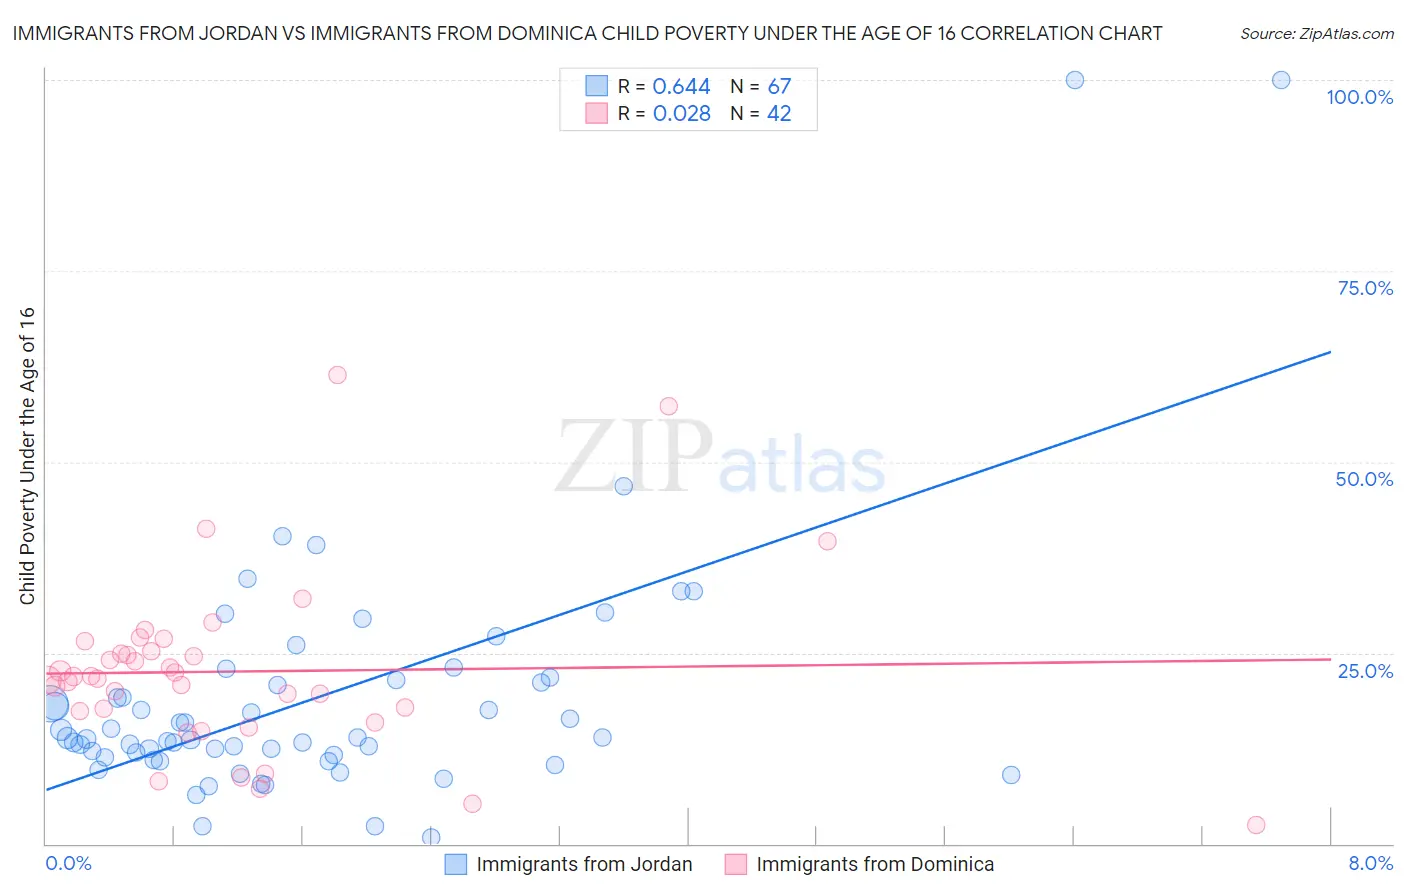 Immigrants from Jordan vs Immigrants from Dominica Child Poverty Under the Age of 16